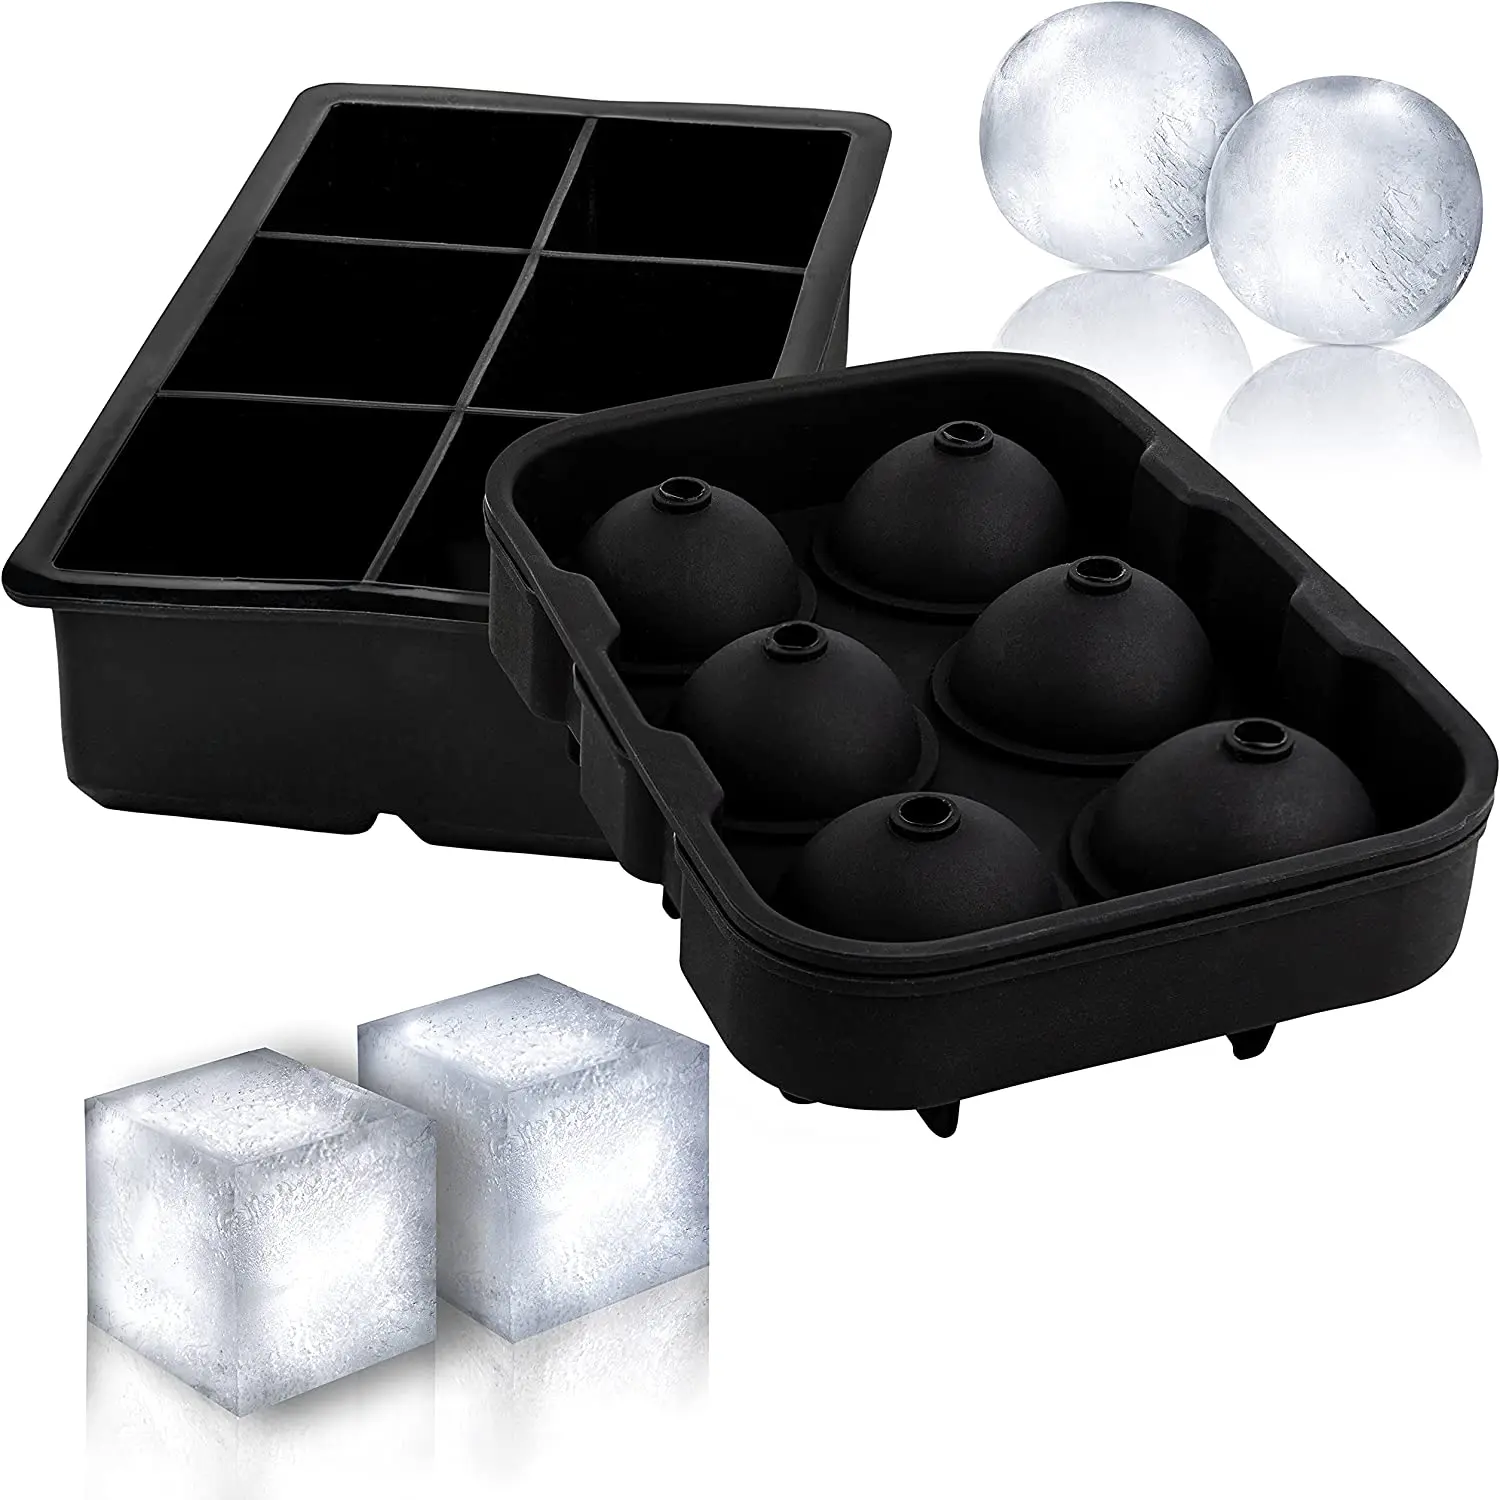 https://ae01.alicdn.com/kf/S37382fb5b14847268e30208988d68b94F/Ice-Cube-Trays-Silicone-Set-of-2-Whiskey-Ice-Ball-Mold-Maker-Round-Ice-Sphere-Cube.jpg